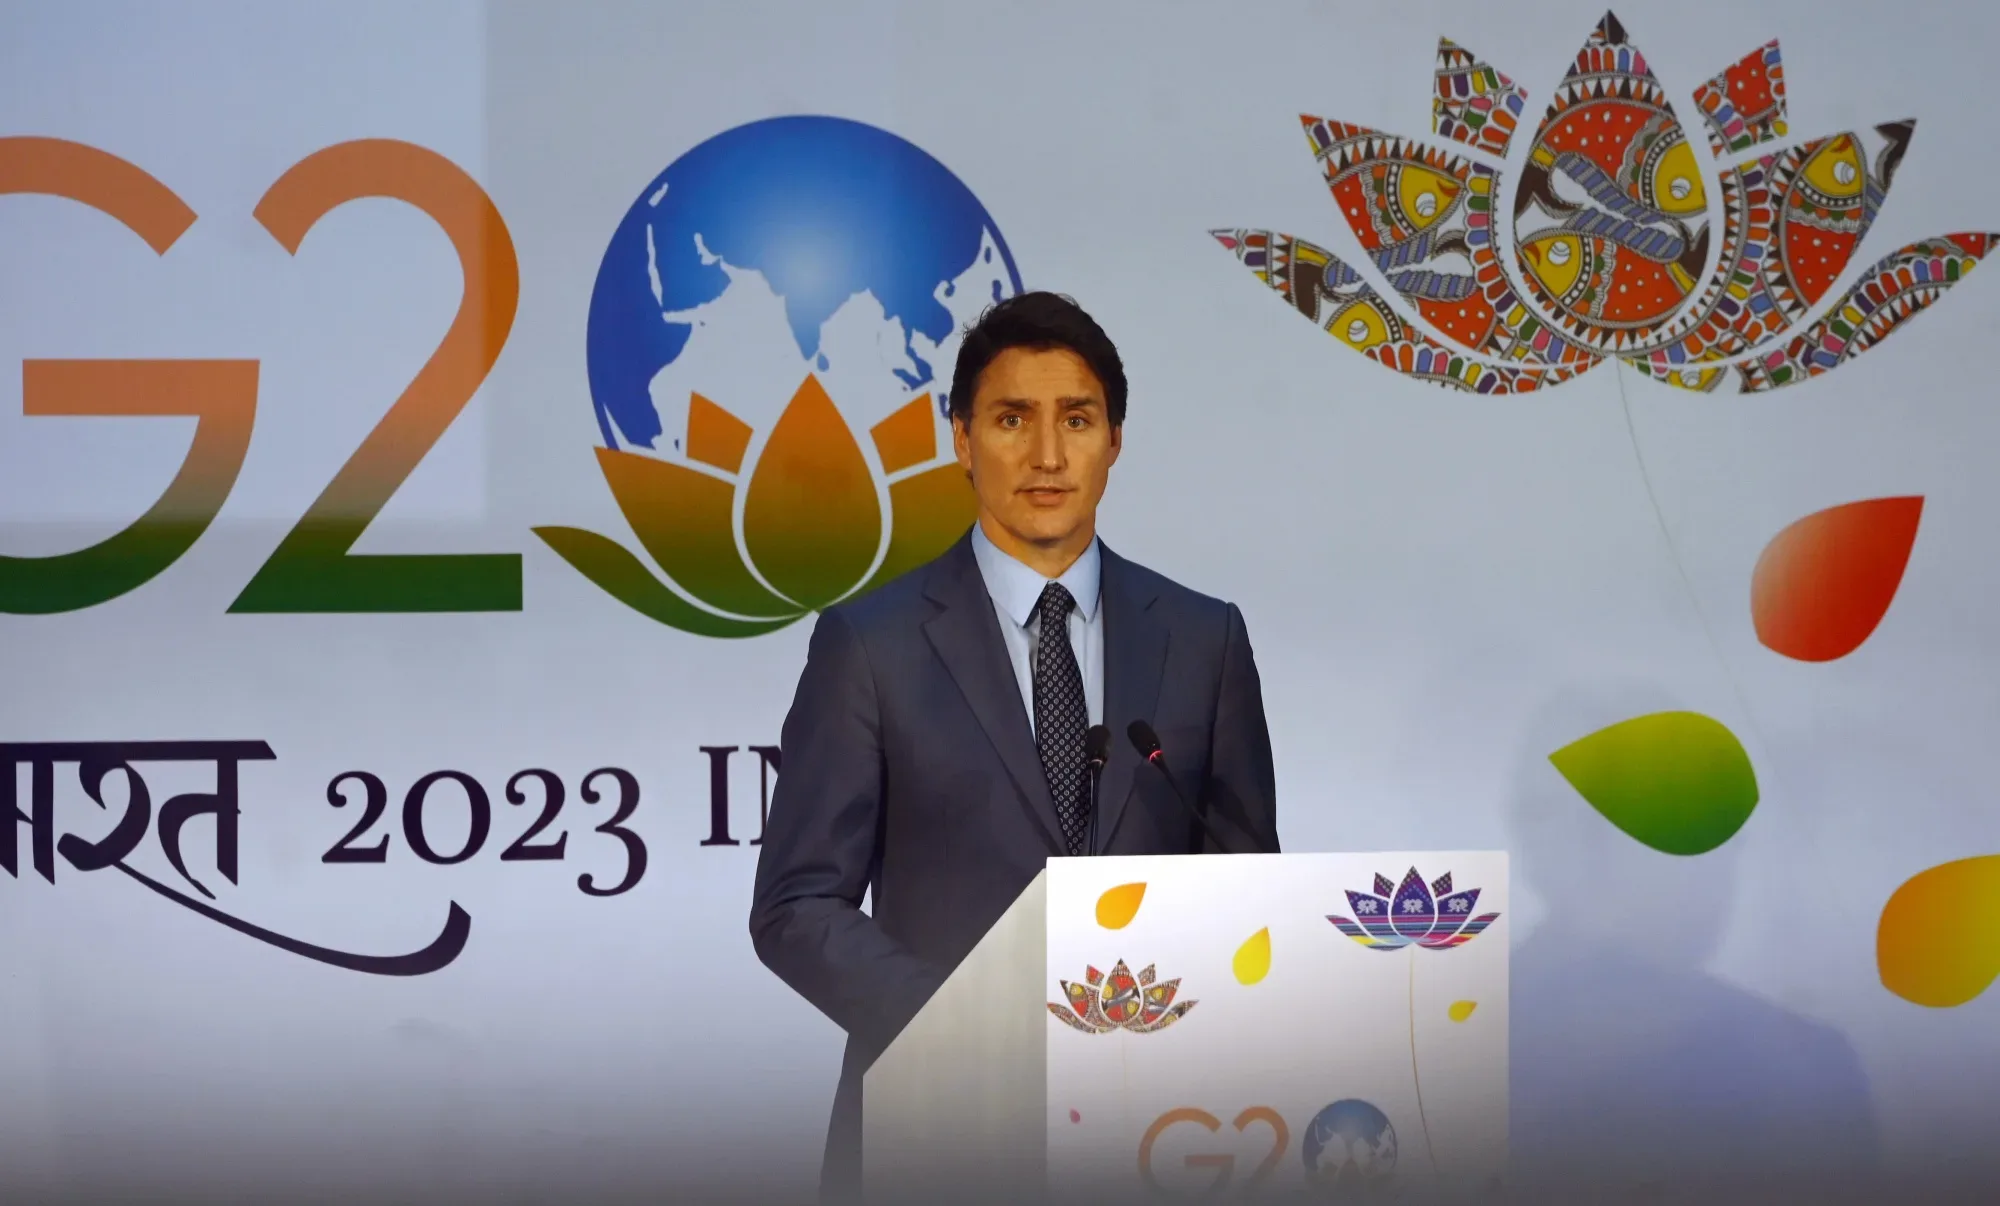 pic of Pm Justin Trudeau speaking at G 20 SummitJustin Trudeau Knocking Out India: Canada vs. India